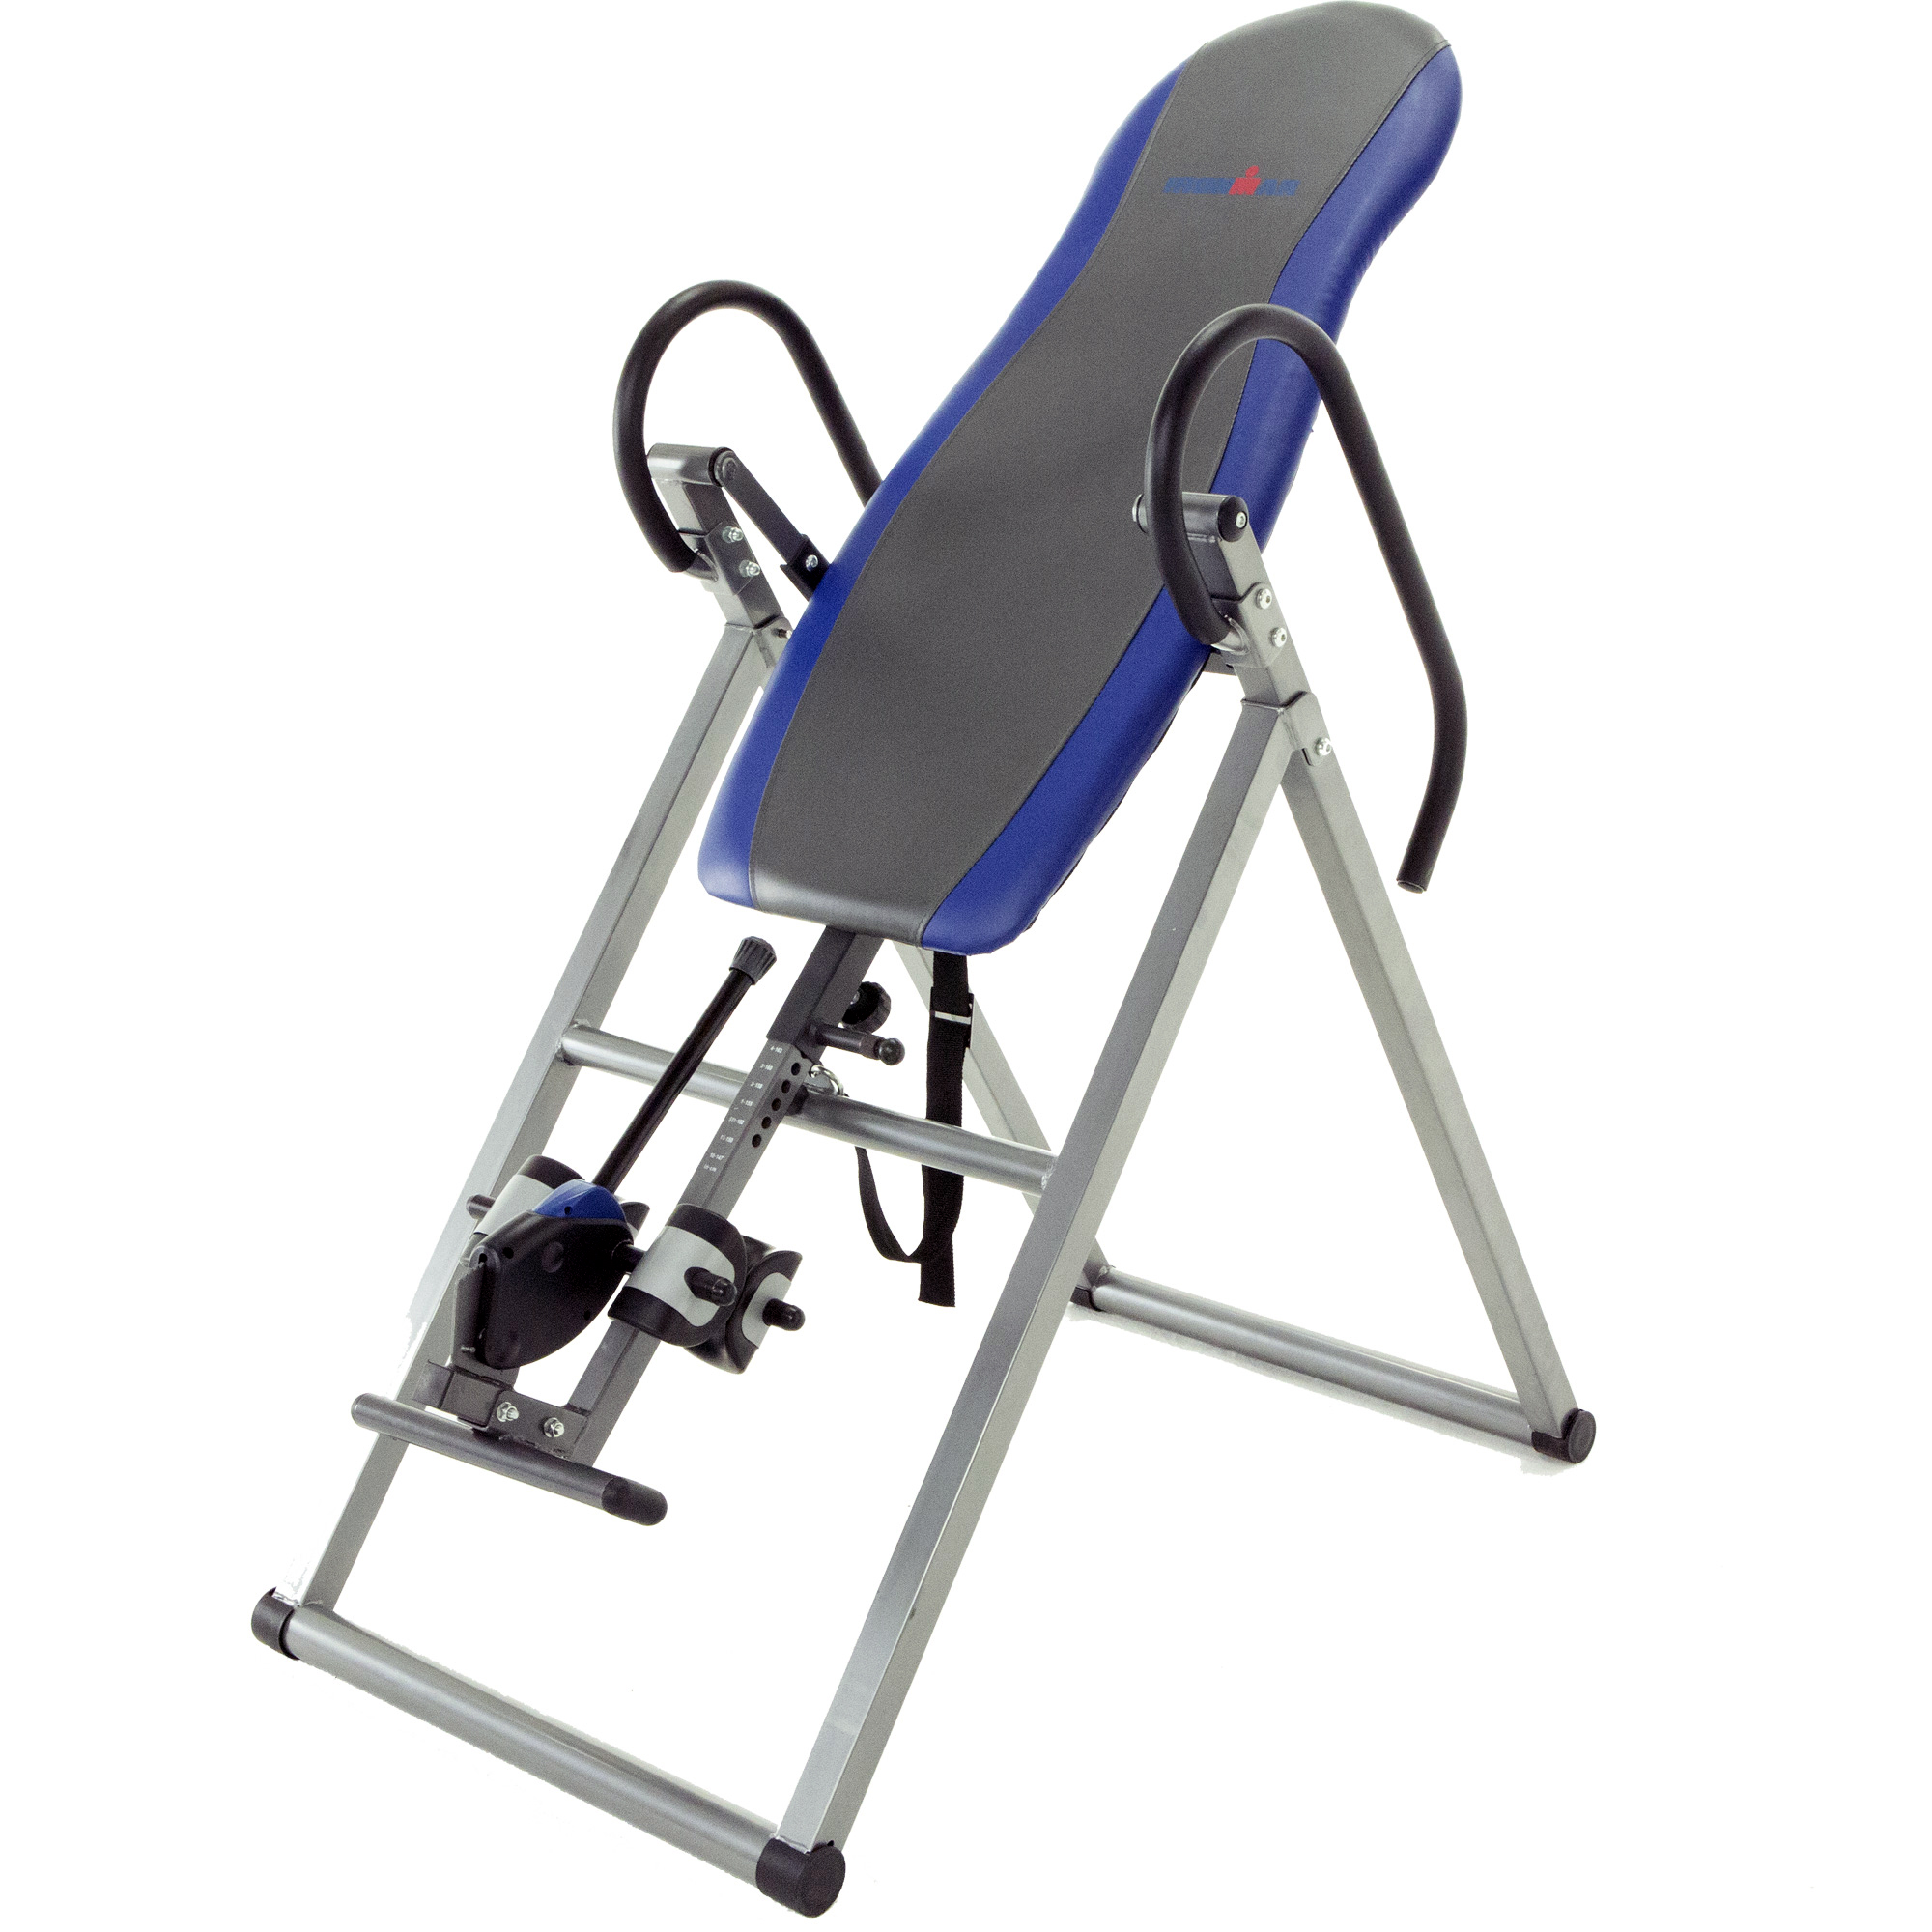 Ironman Fitness Essex 990SL Inversion Table with Unique Sure lock System - image 3 of 19